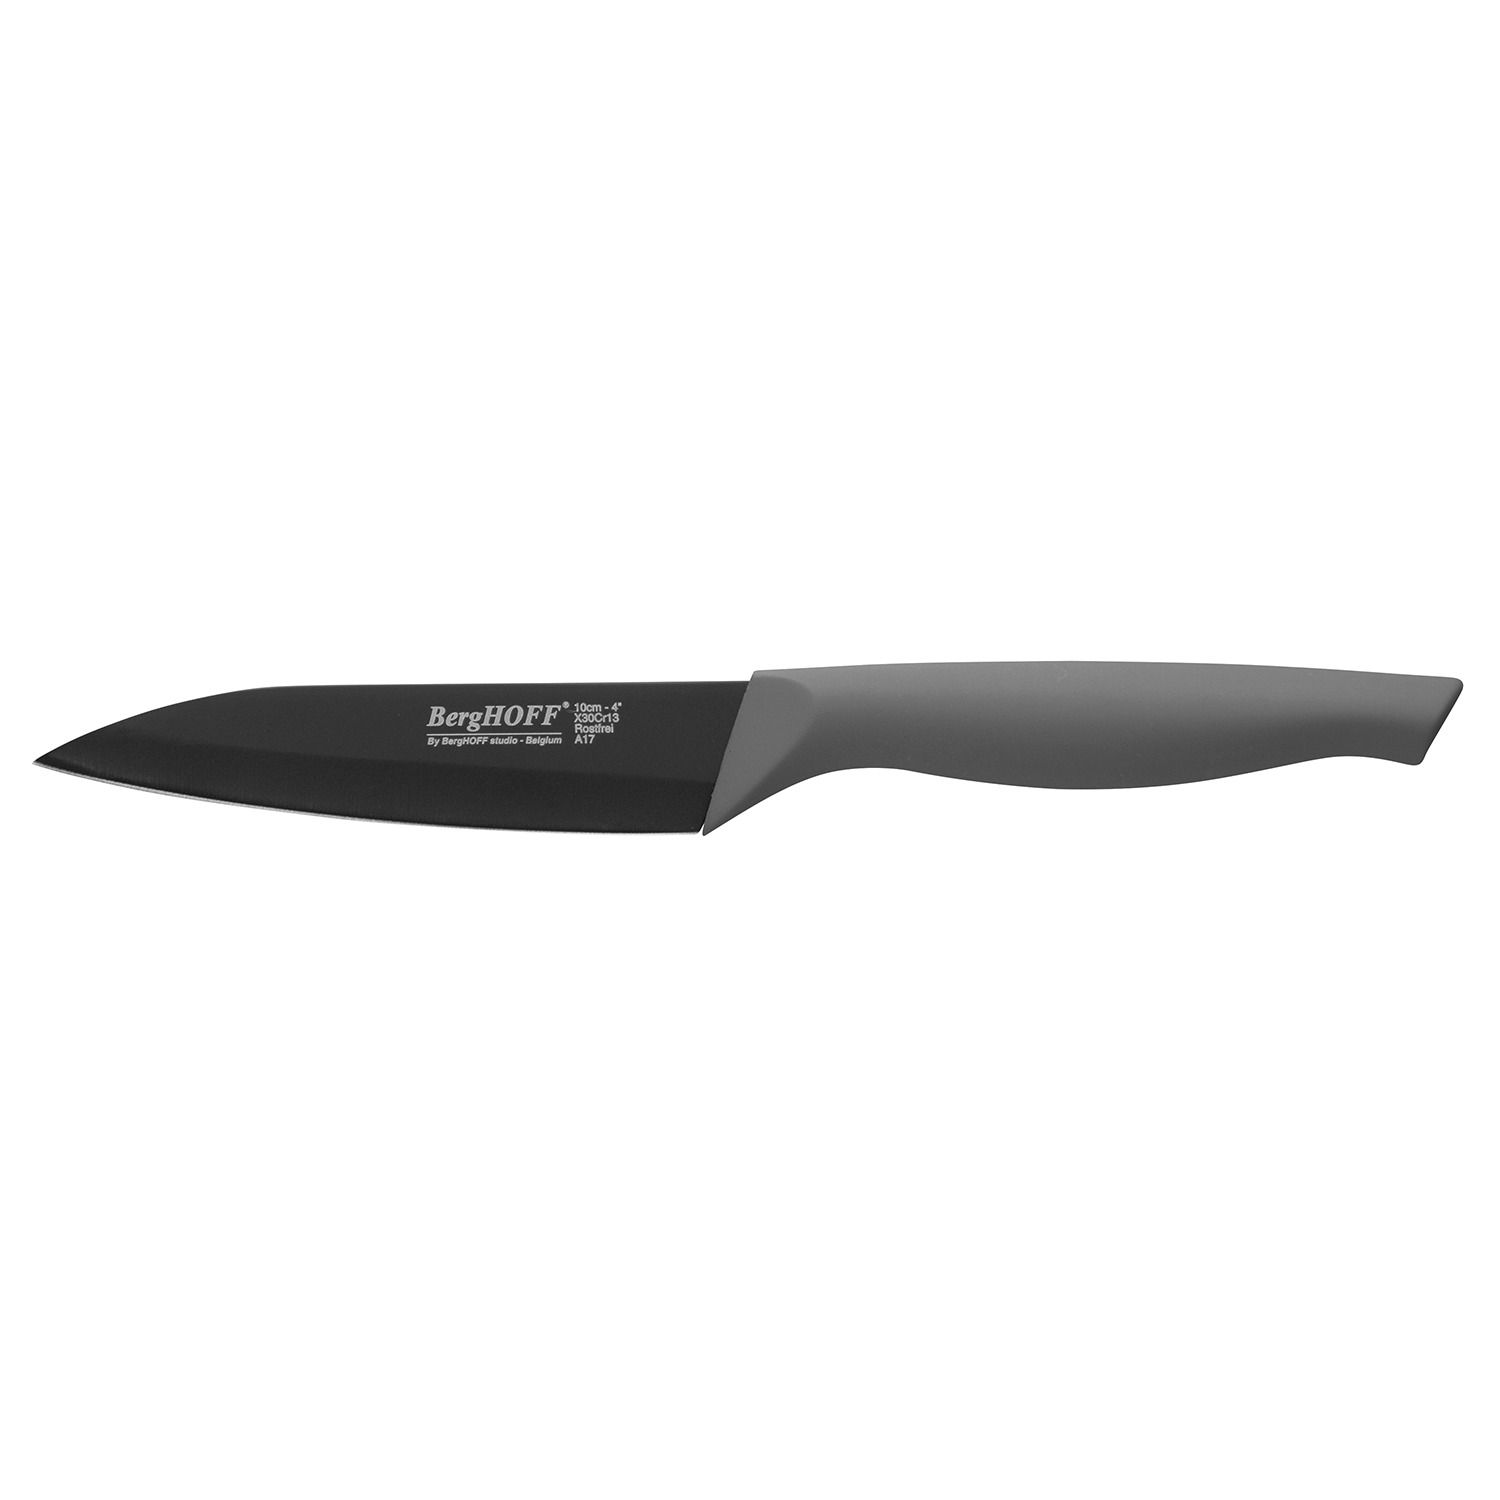 Hampton Forge Epicure Utility Knife with Blade Guard - Shop Knives